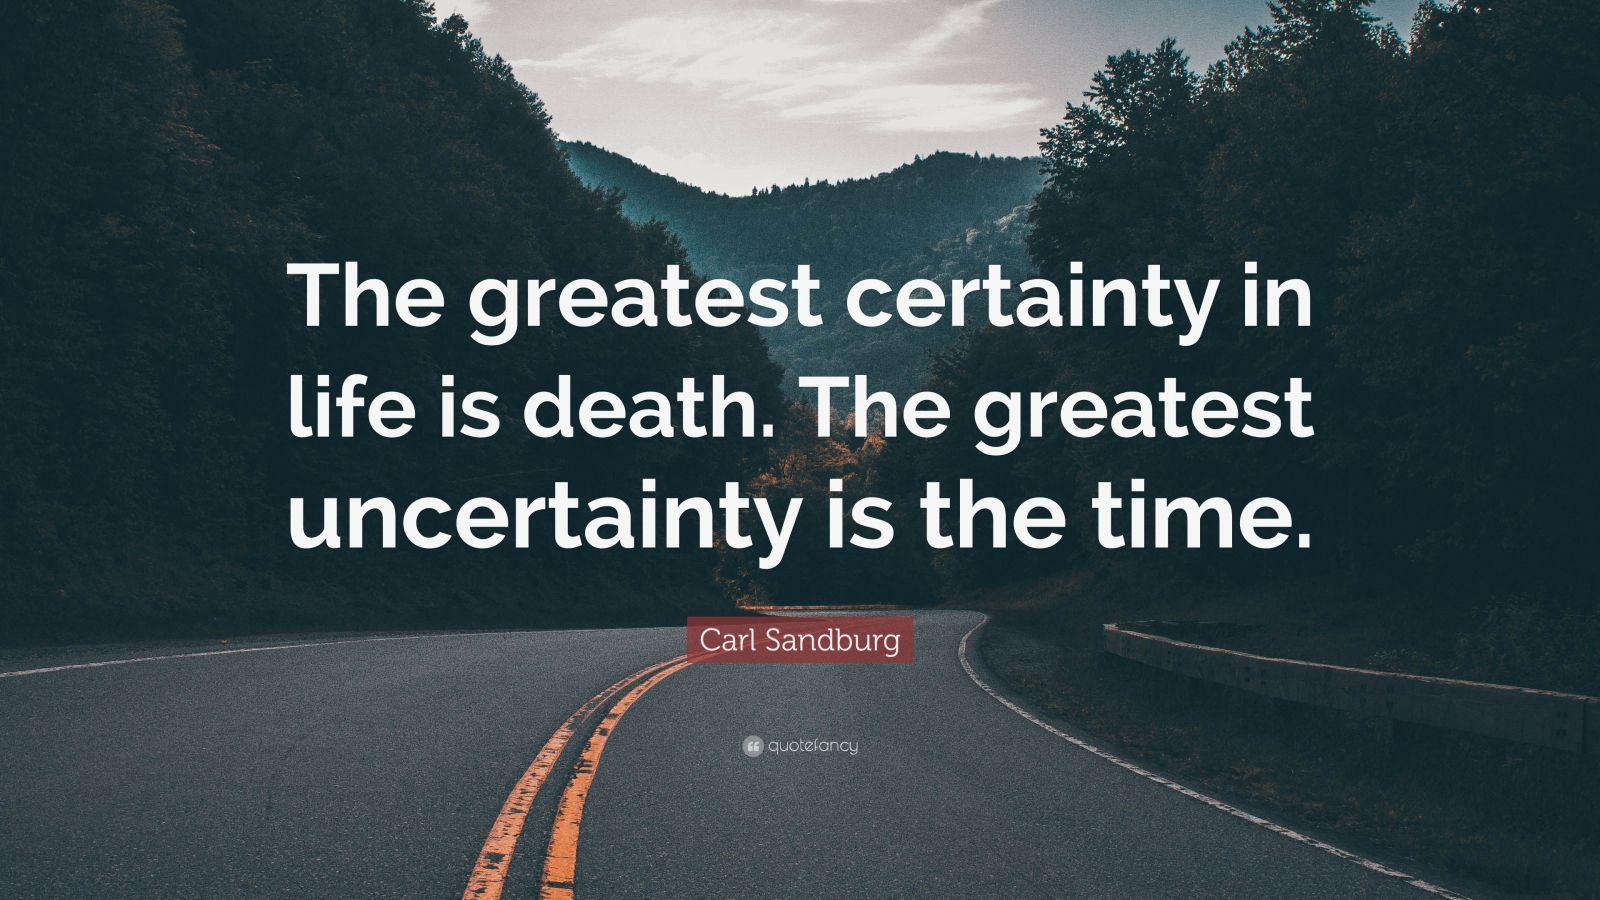 Best Certainty Quotes in 2023 Don t miss out 